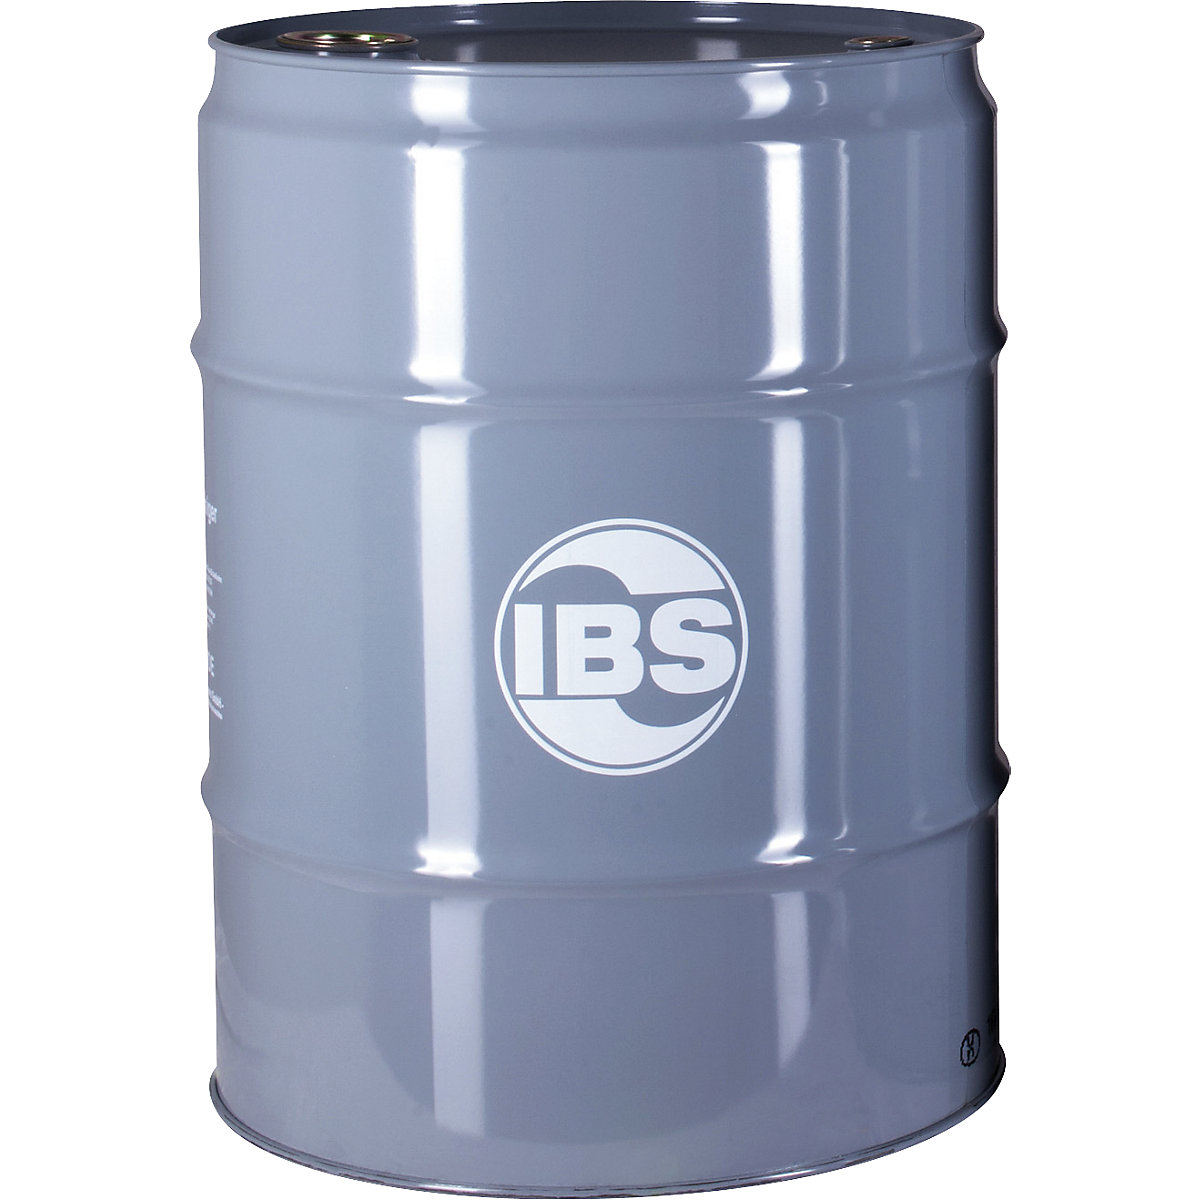 EL/Extra special cleaning solution – IBS Scherer